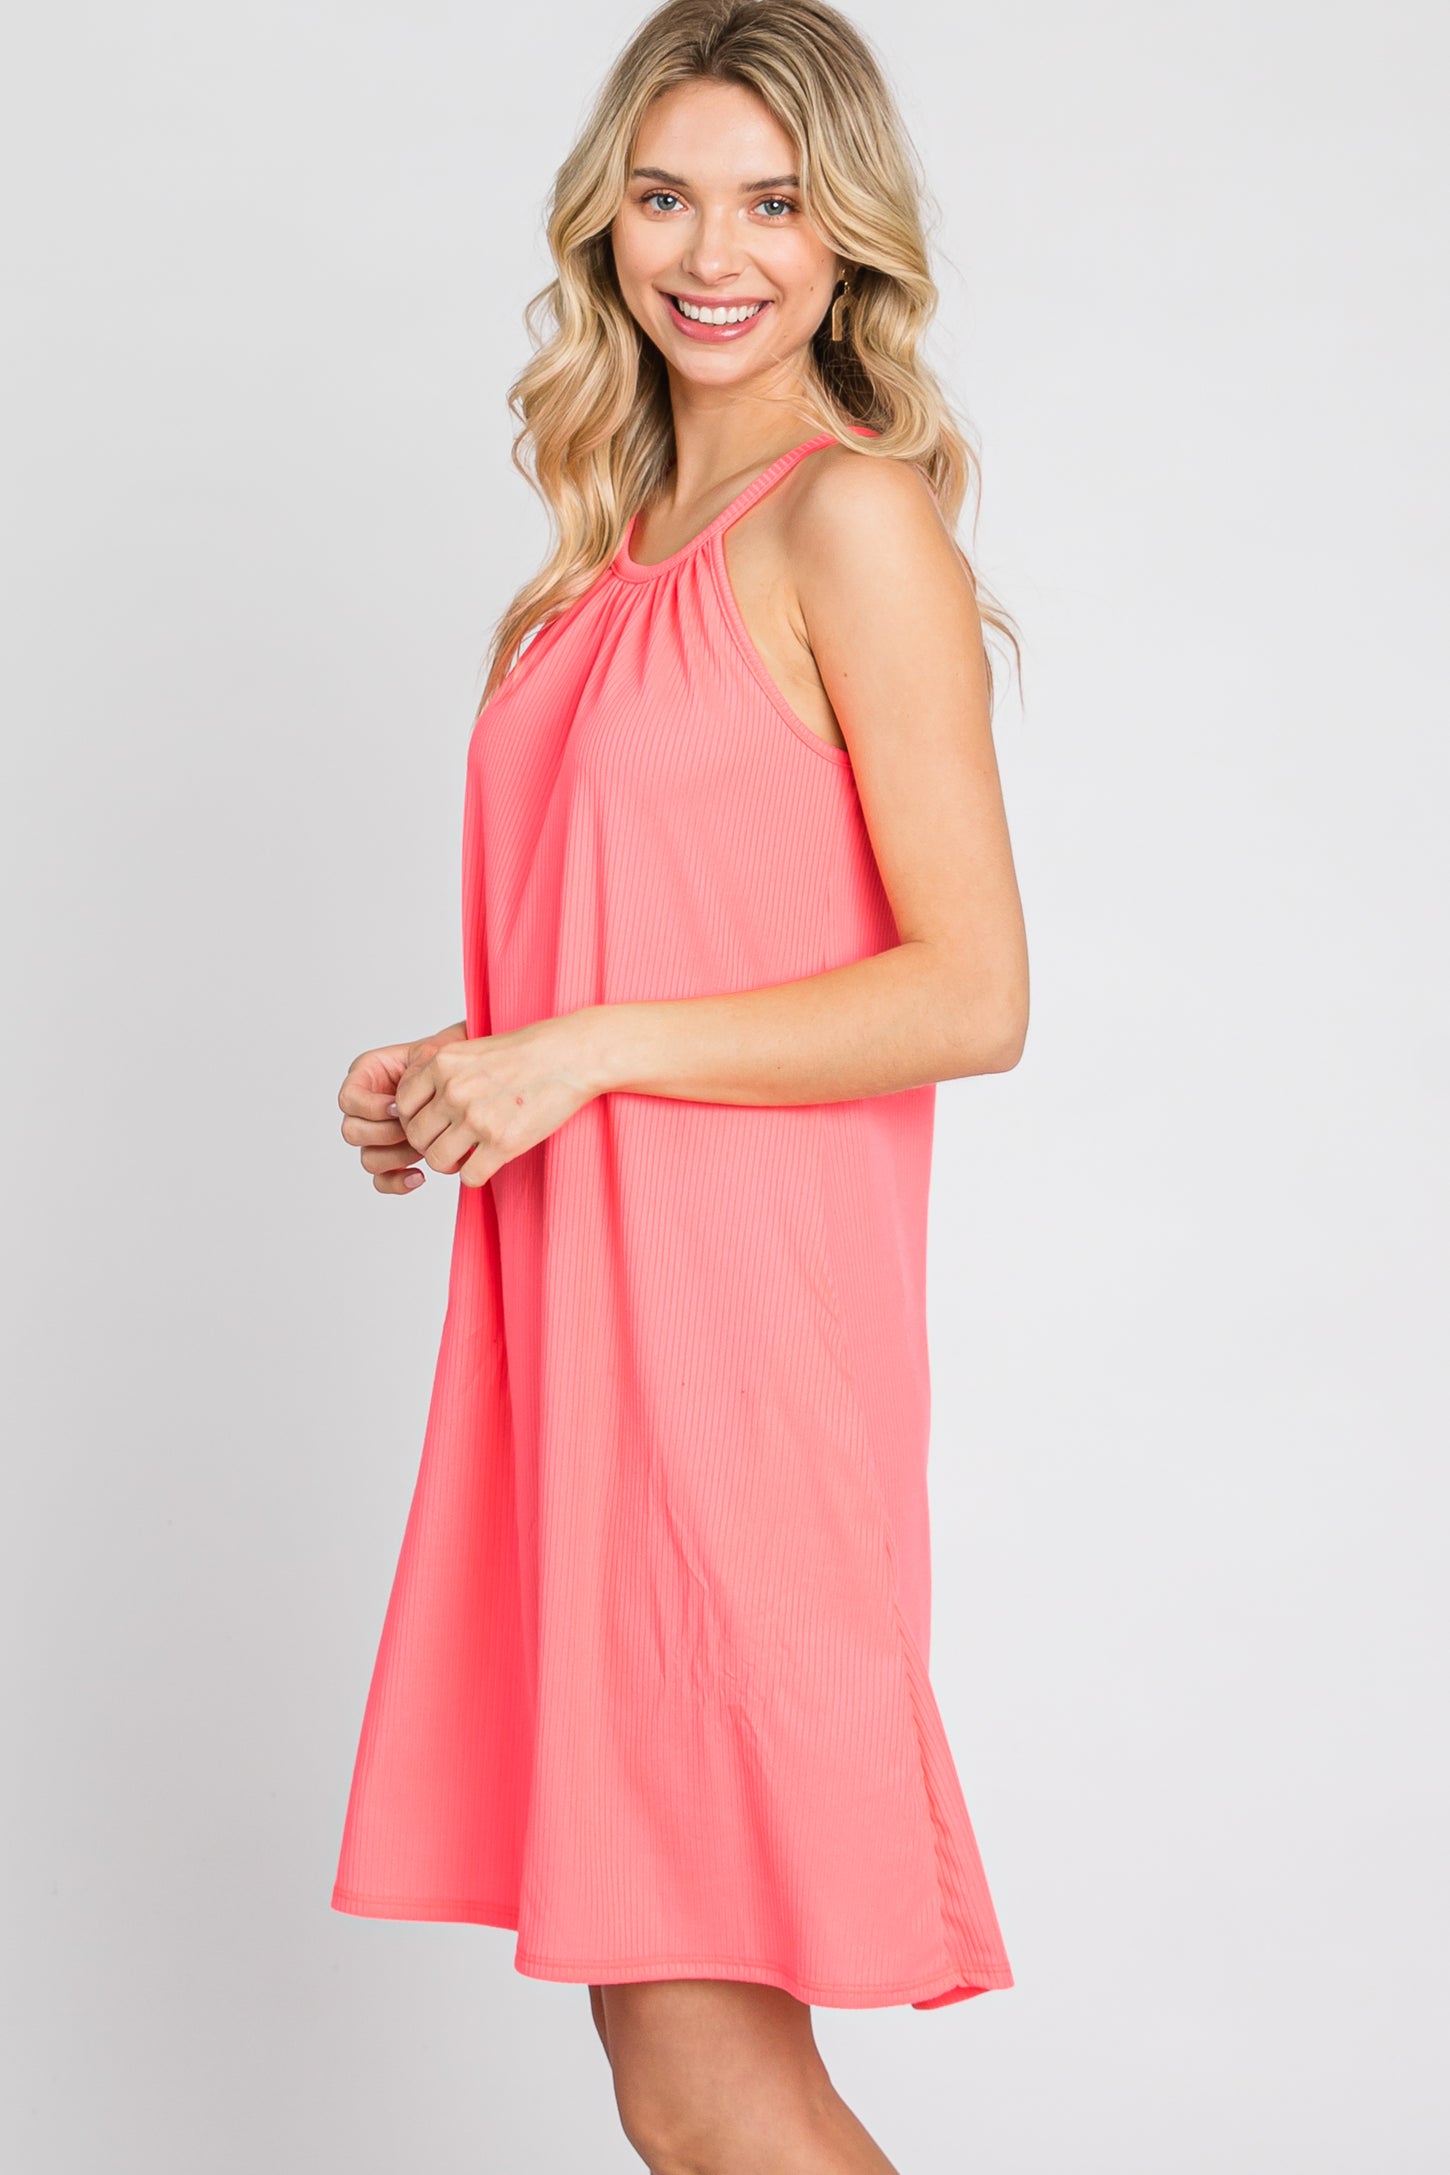 Solid High-Low Maternity/Nursing Dress - Coral